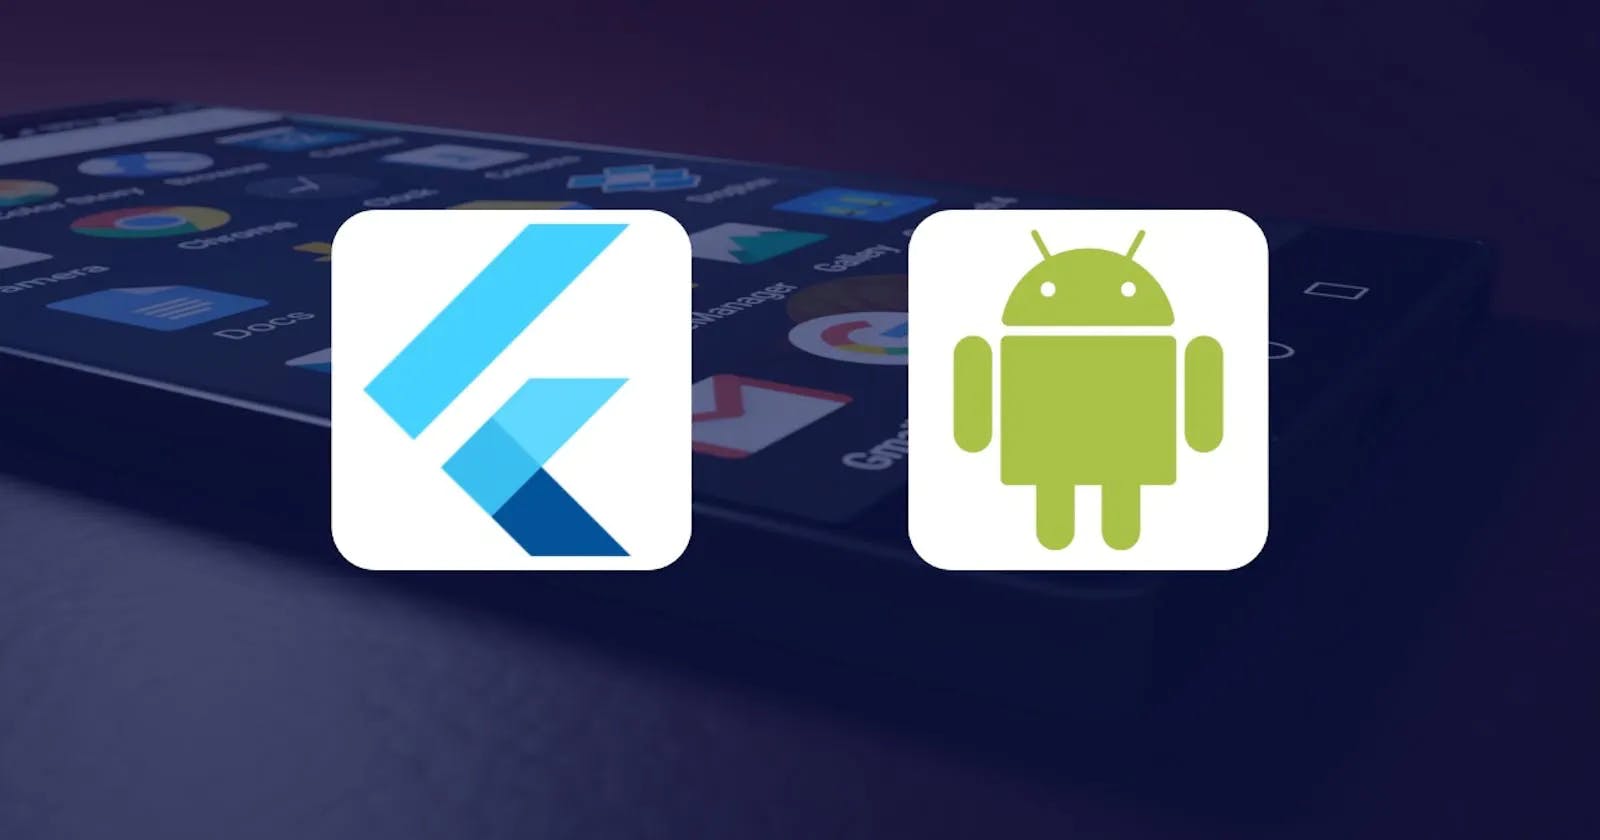 In-Depth Guide to Work with Platform Channels by Integrating 3rd Party SDK: Android